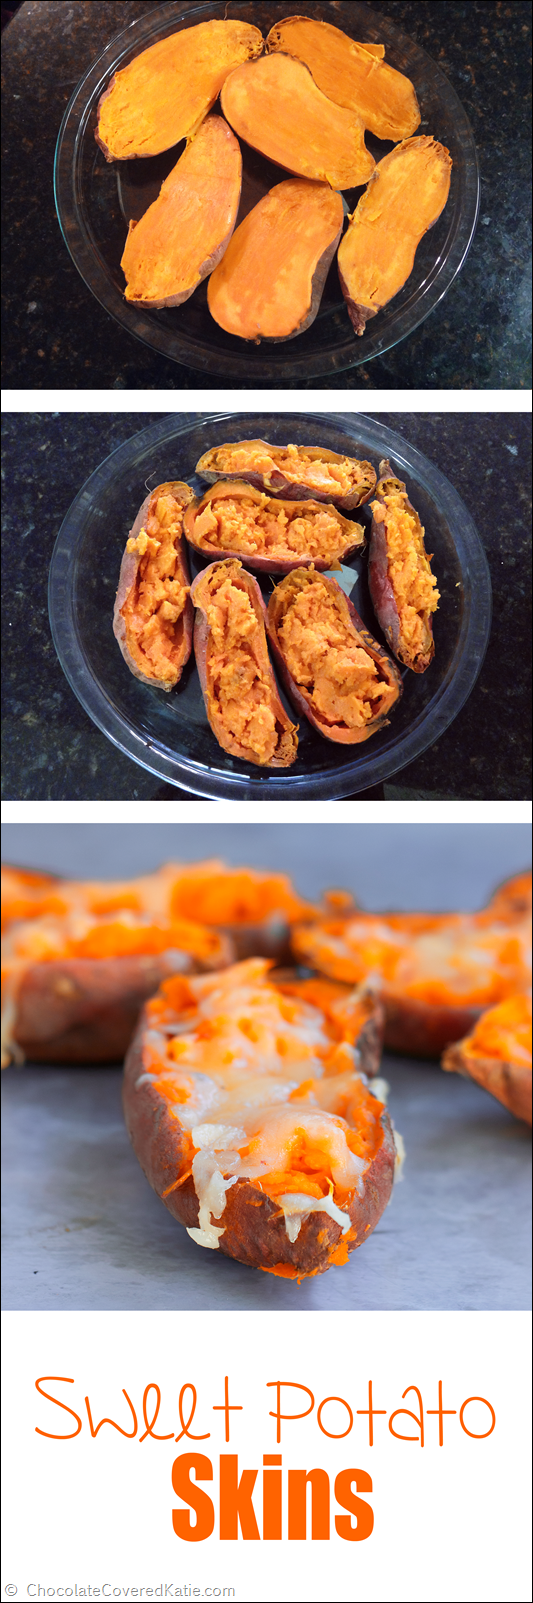 Irresistibly cheesy, addictively crispy, and secretly healthy, they are the perfect comfort food party appetizer. Really easy and quick to make: https://chocolatecoveredkatie.com/2015/01/22/loaded-baked-sweet-potato-skins/ 